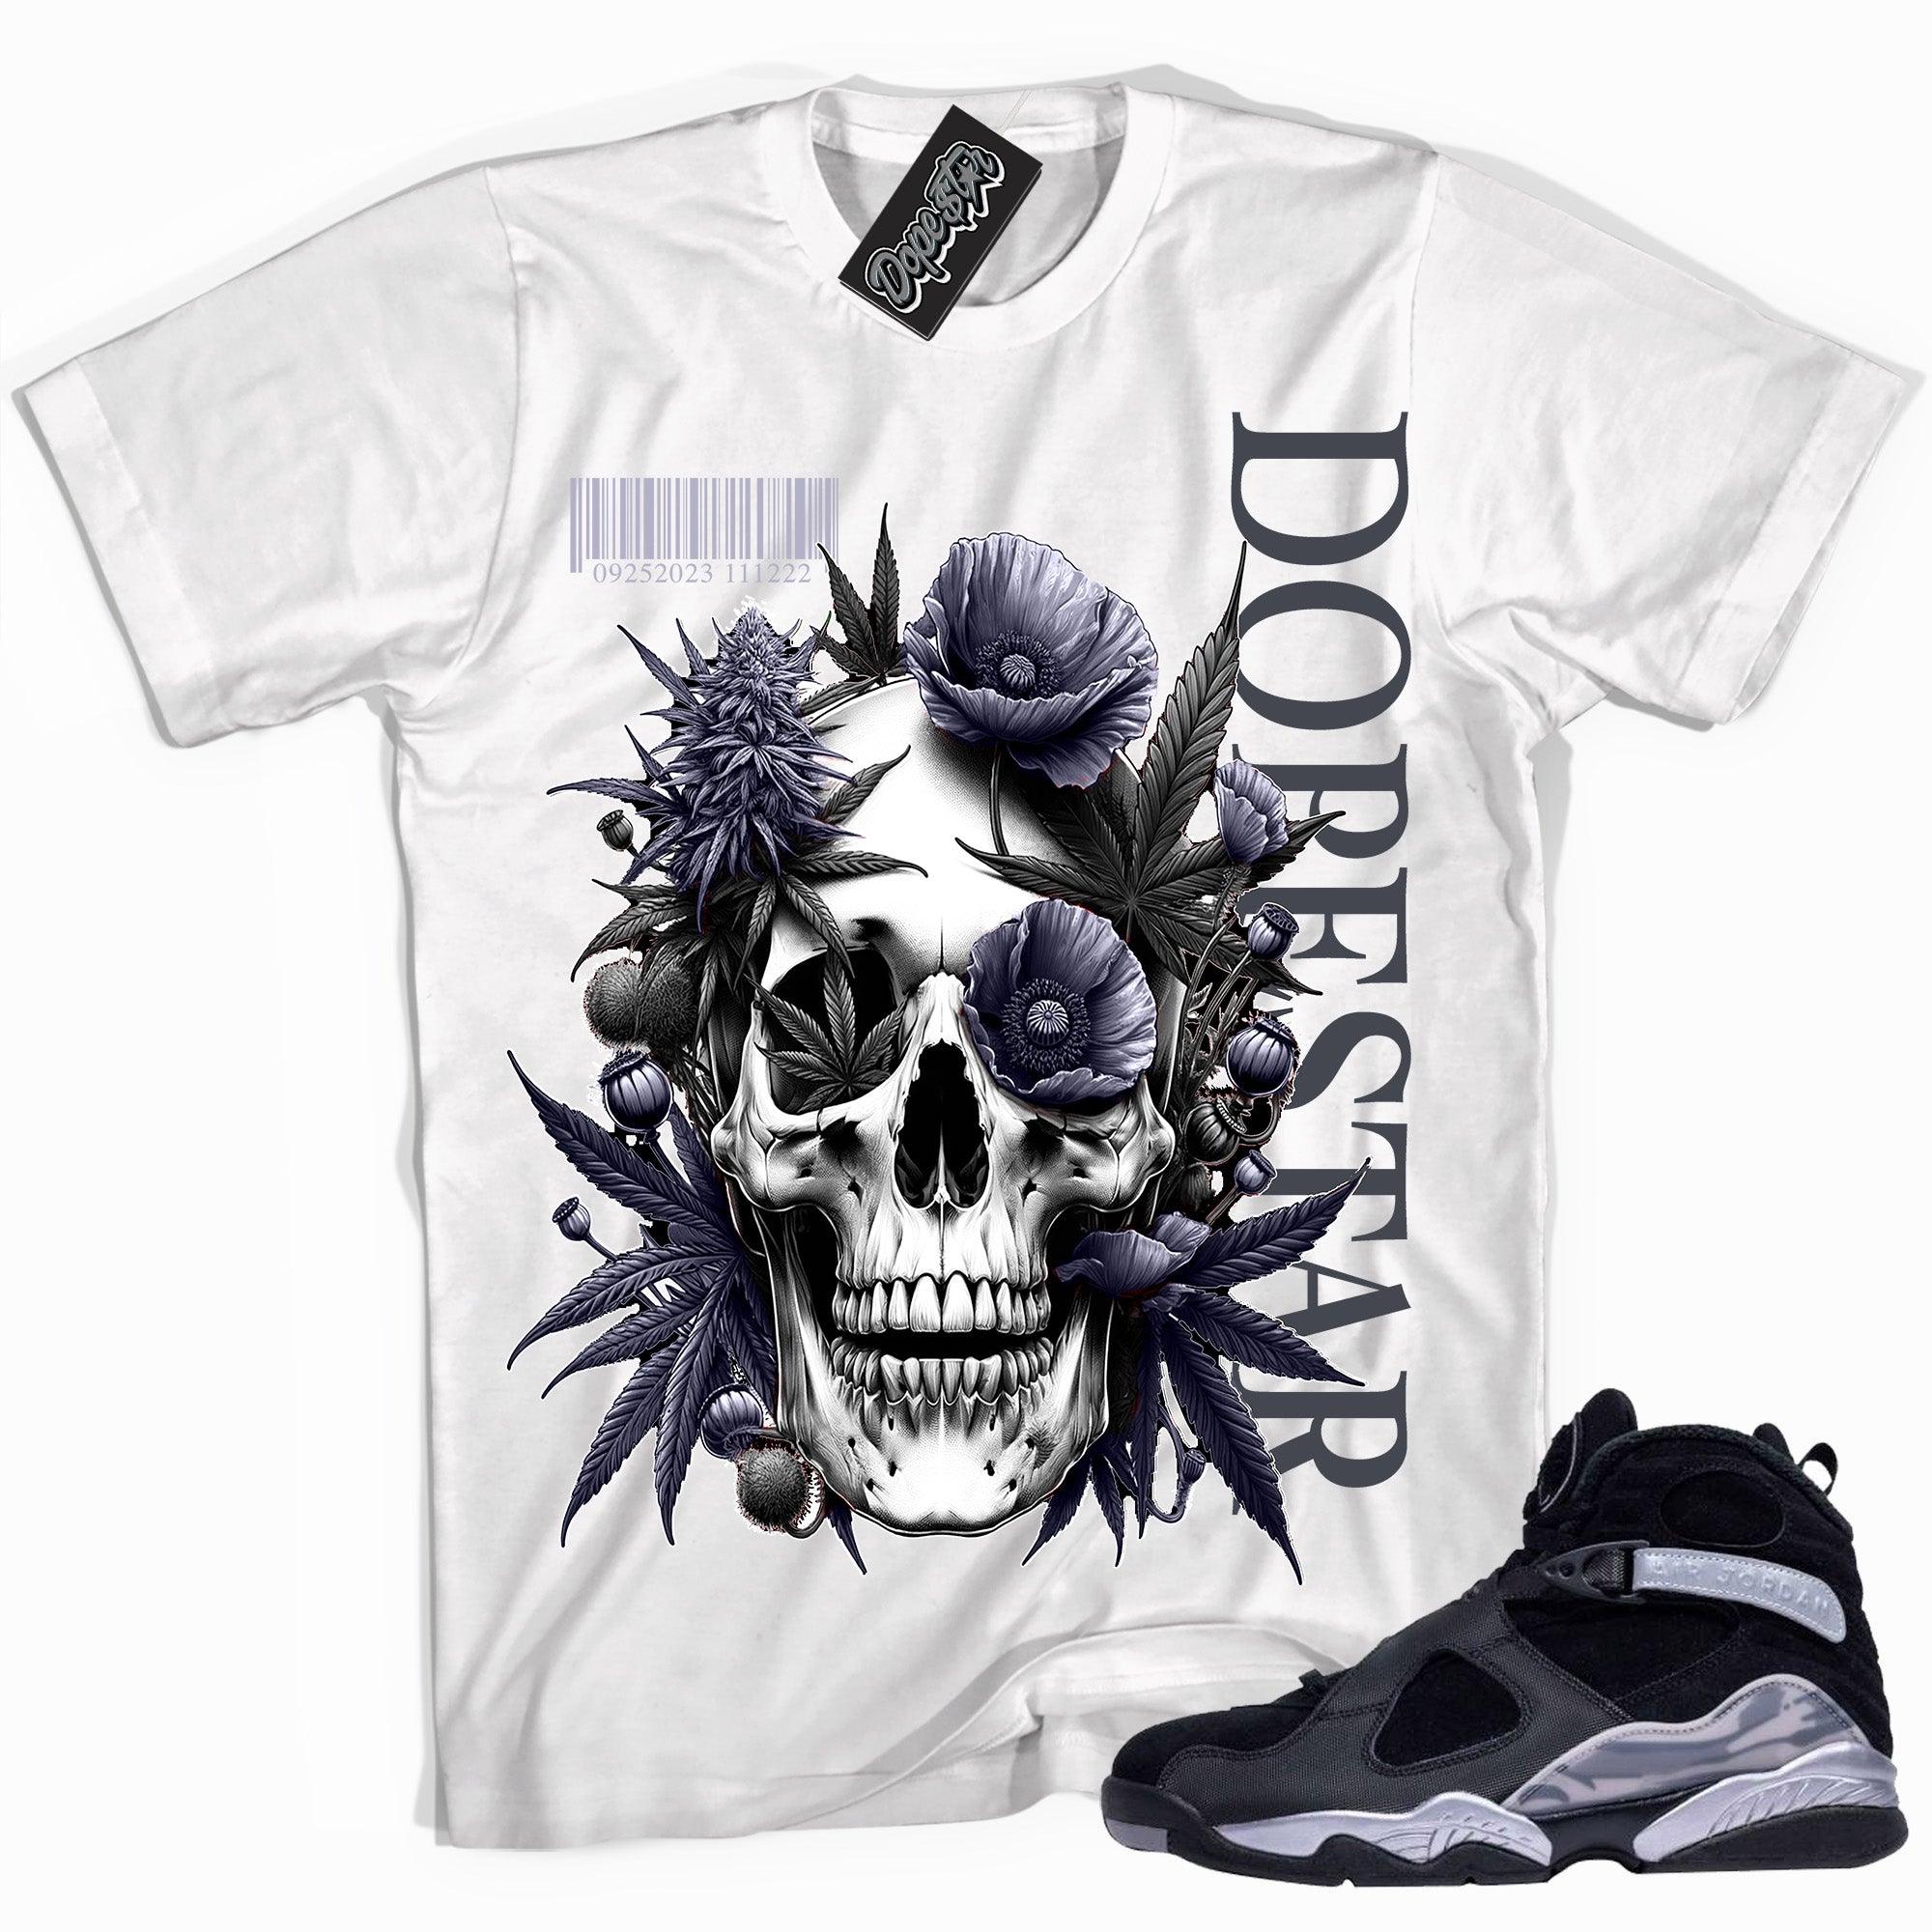 Cool White graphic tee with “ Skull Cannabis Poppies ” print, that perfectly matches Air Jordan 8 Winterized sneakers 